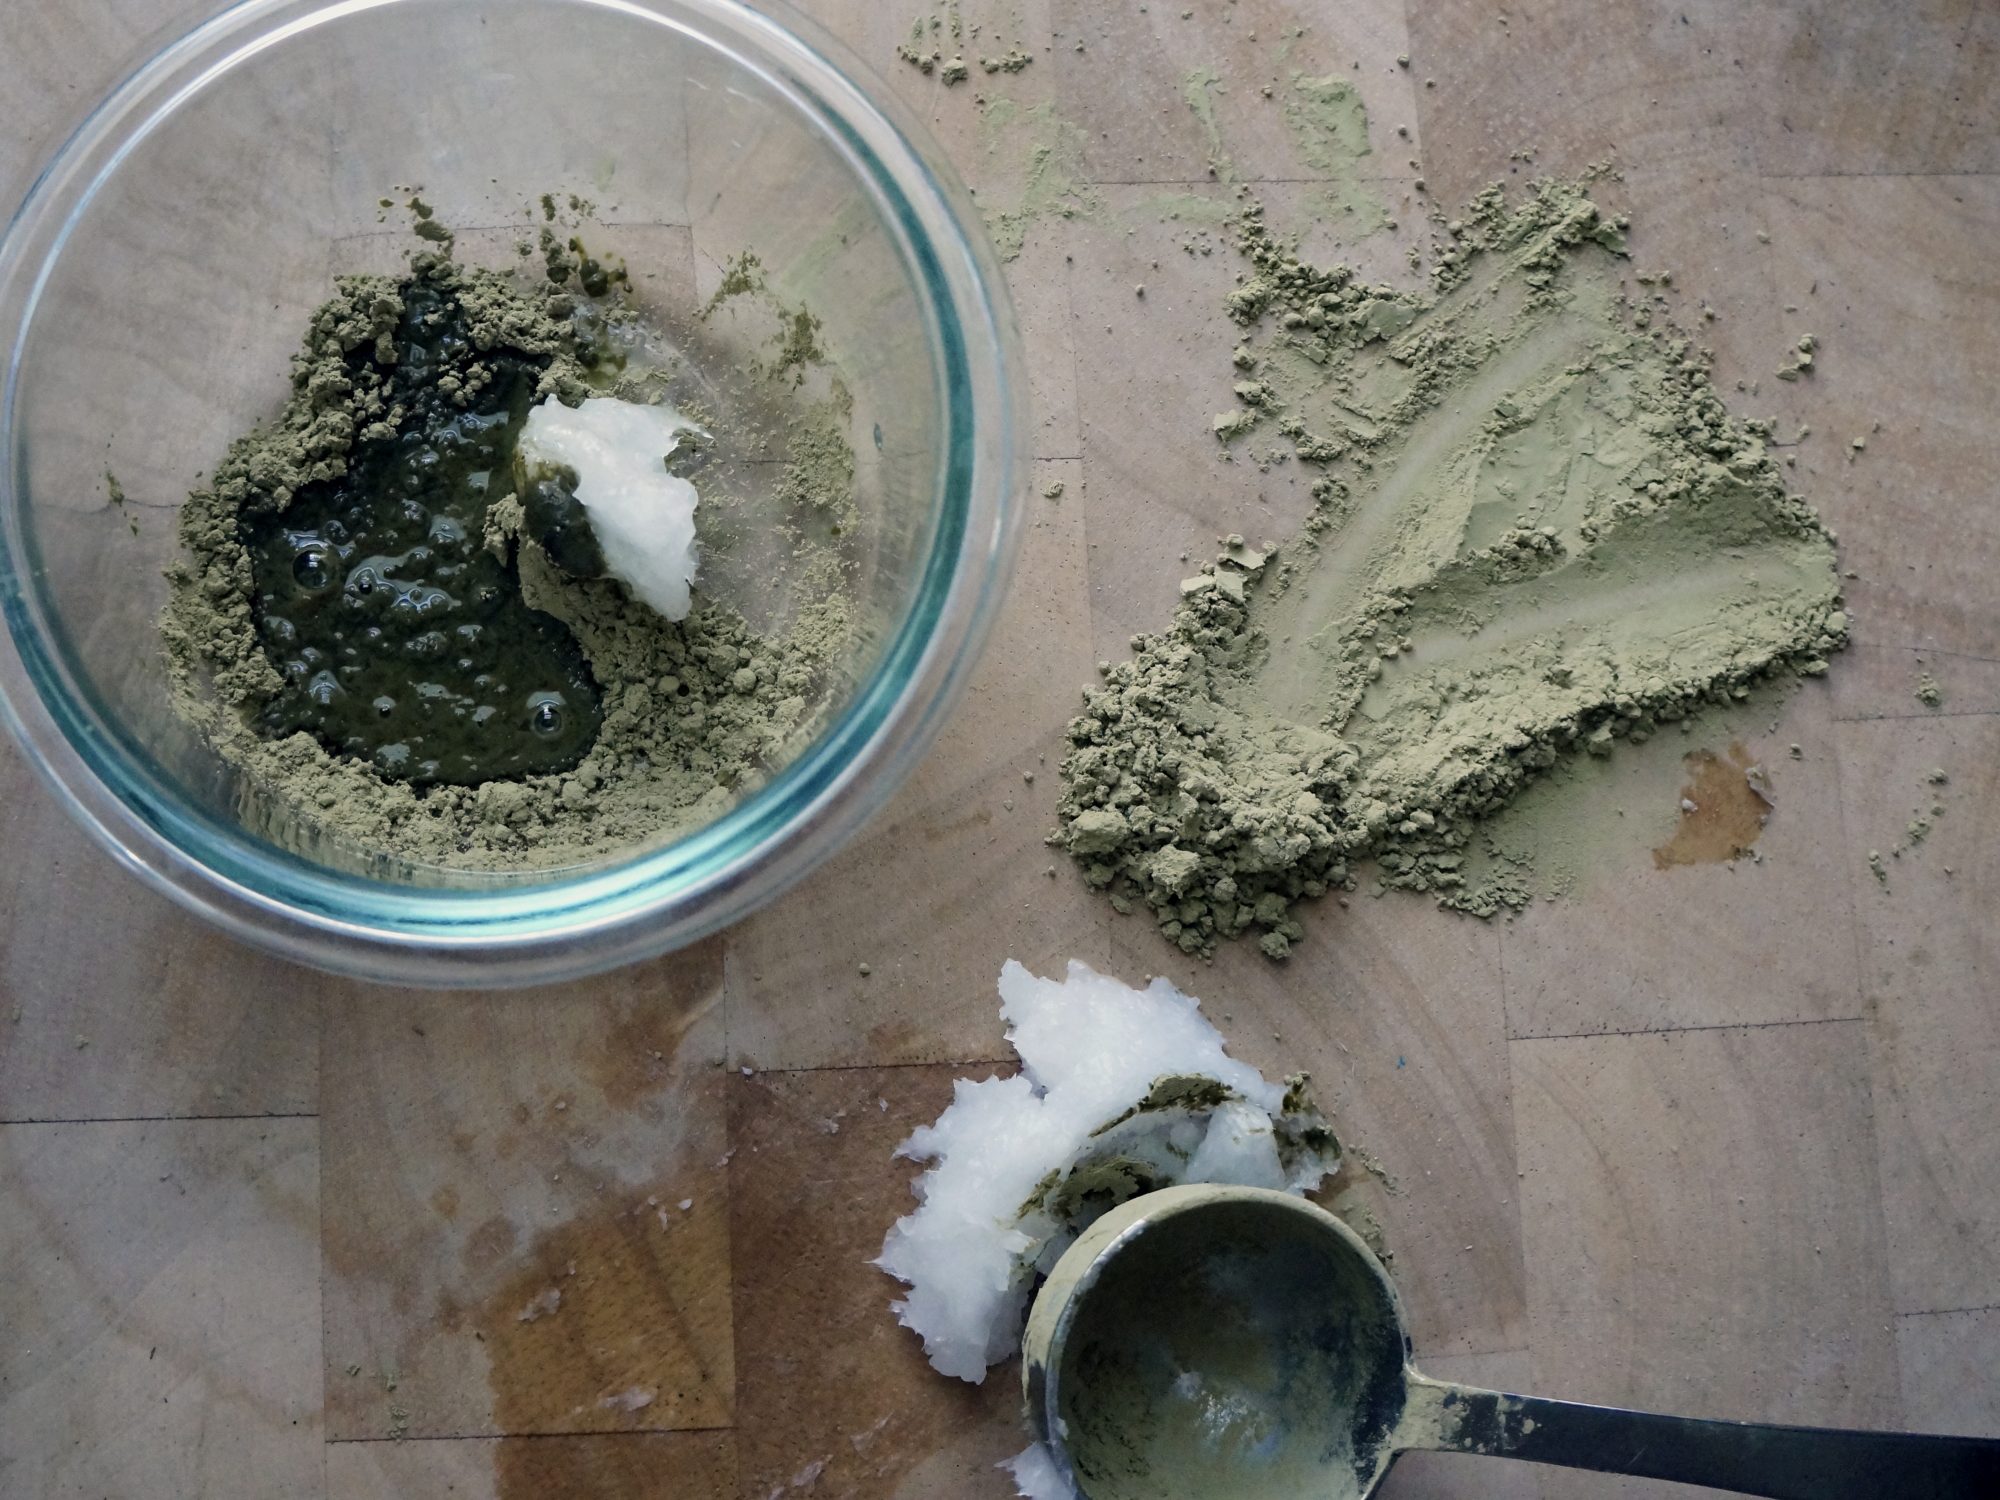 This simple DIY matcha-infused face mask will soothe dry, irritated skin during this transitional season